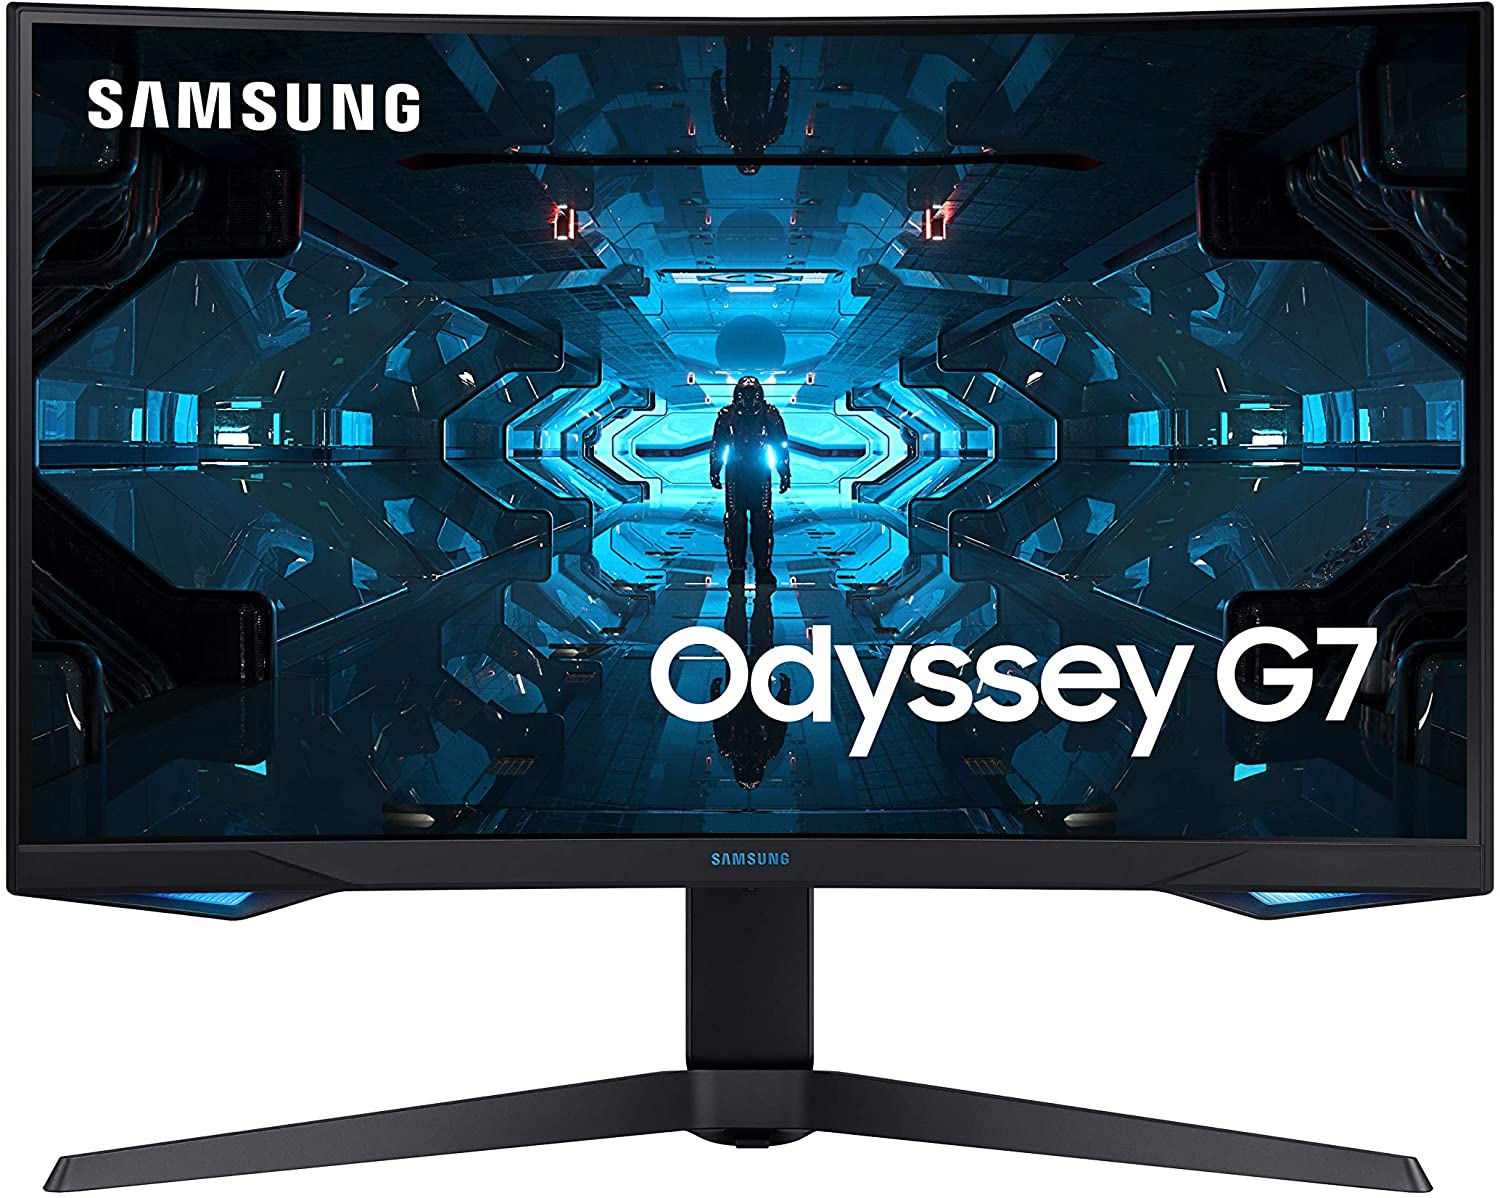 The curved Samsung Odyssey G7 from the front on a white background